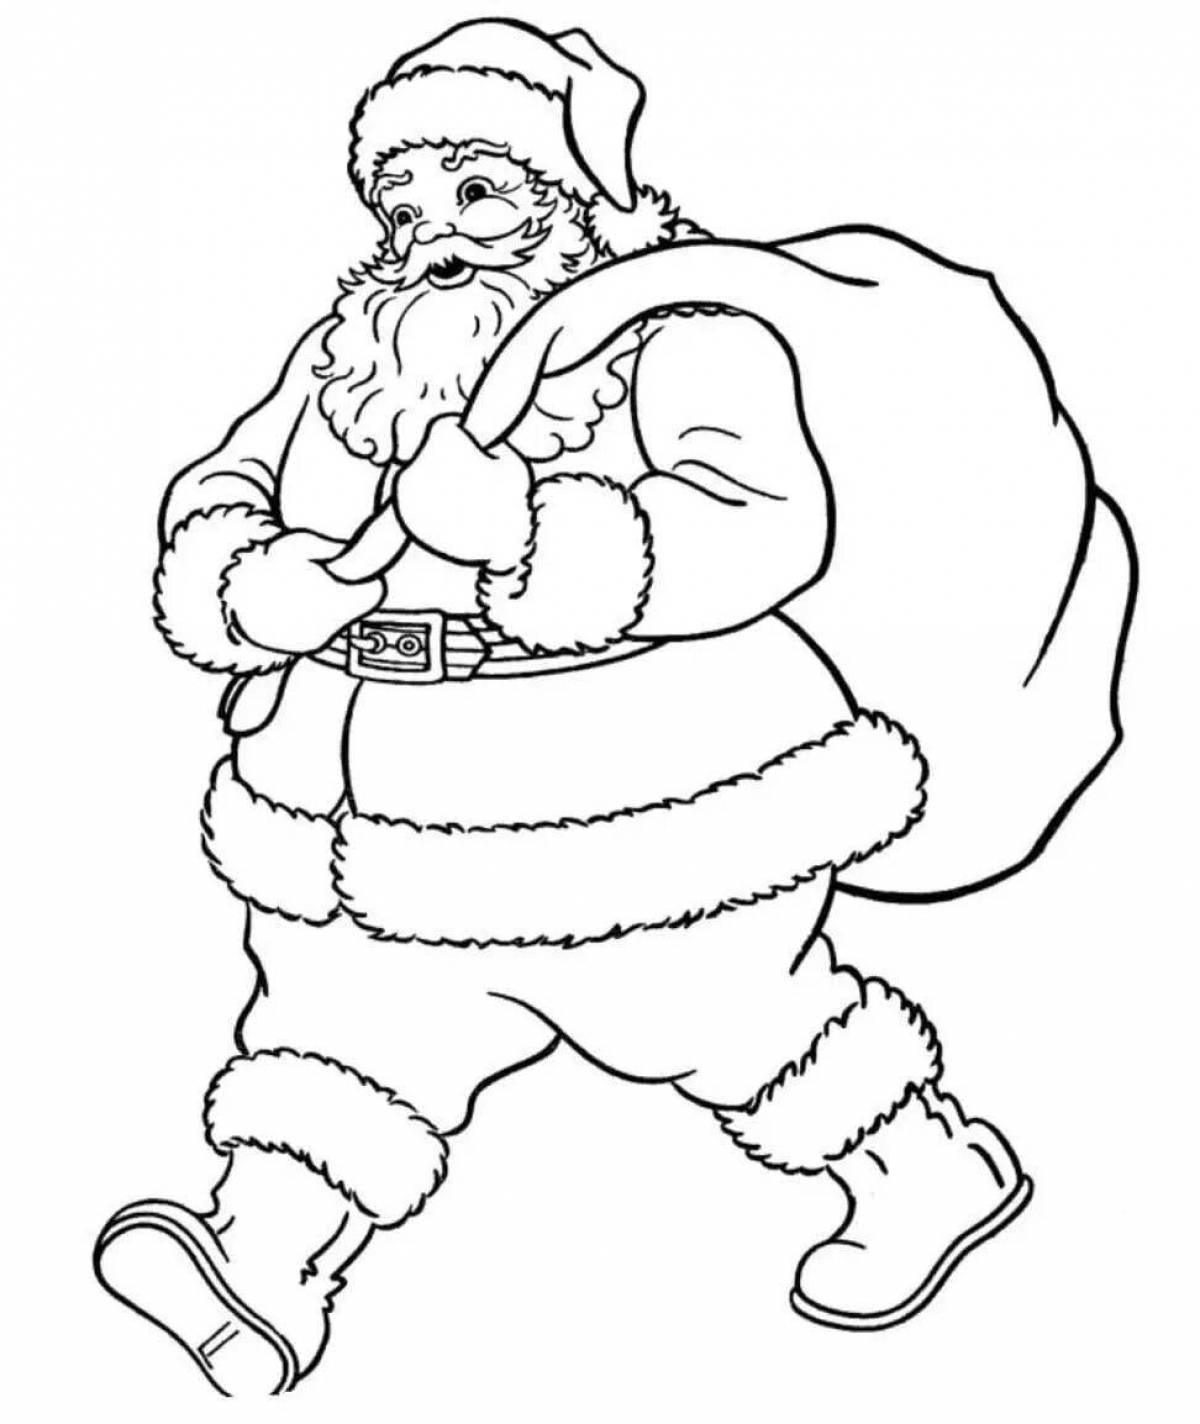 Animated governor frost coloring book